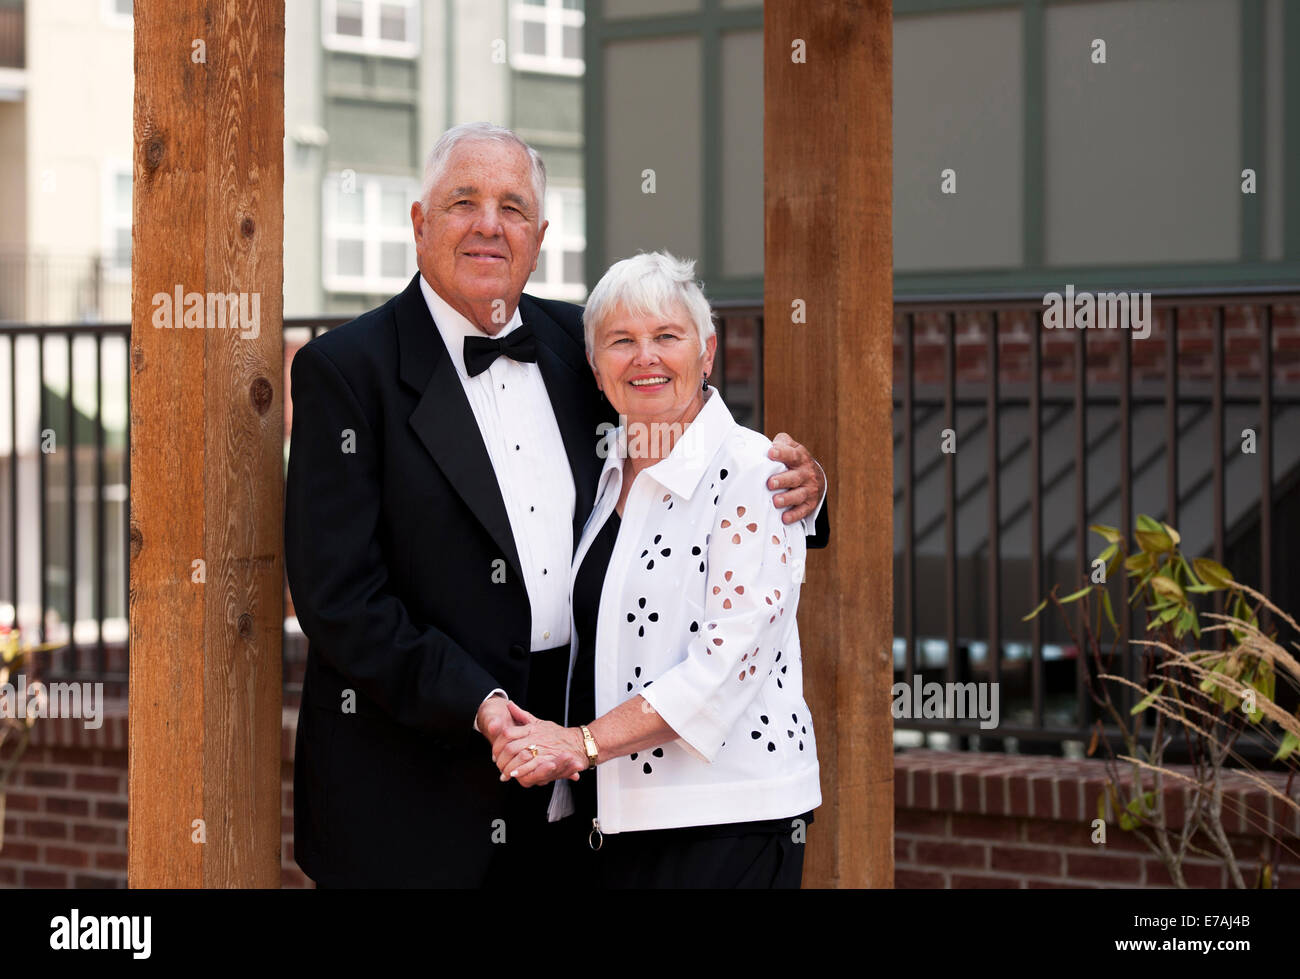 A happy mature couple dressed for a black tie event Stock Photo